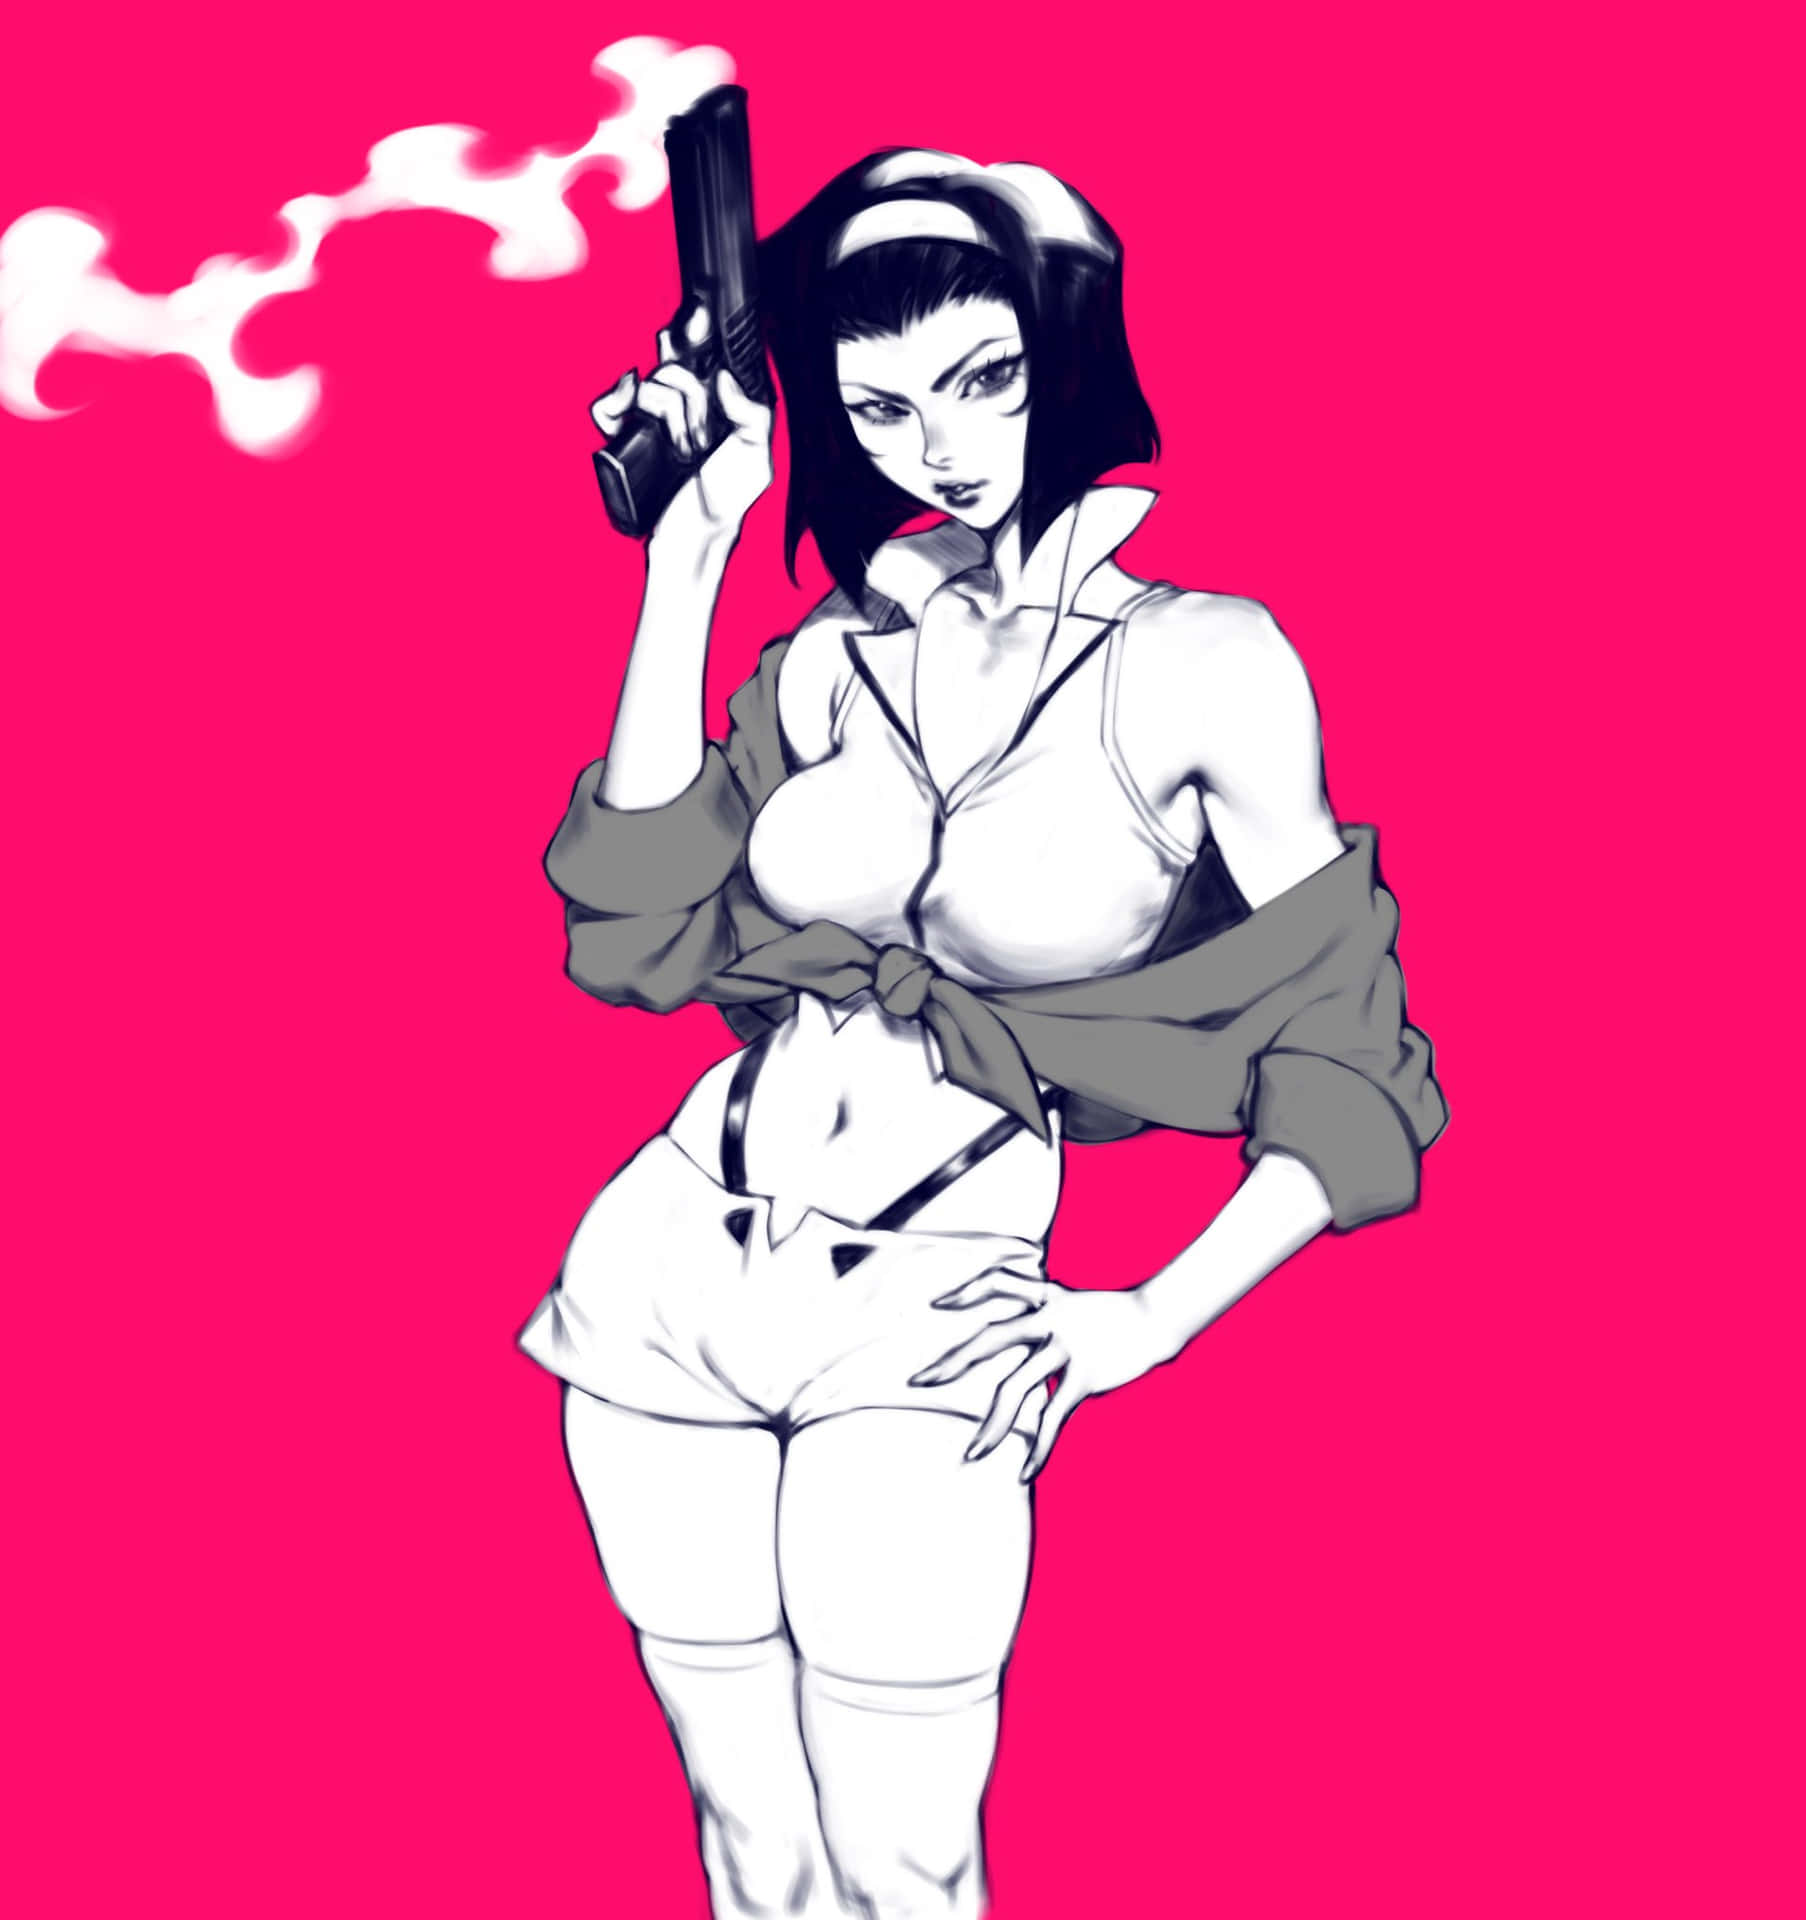 Faye Valentine striking a pose in an unusual outfit Wallpaper